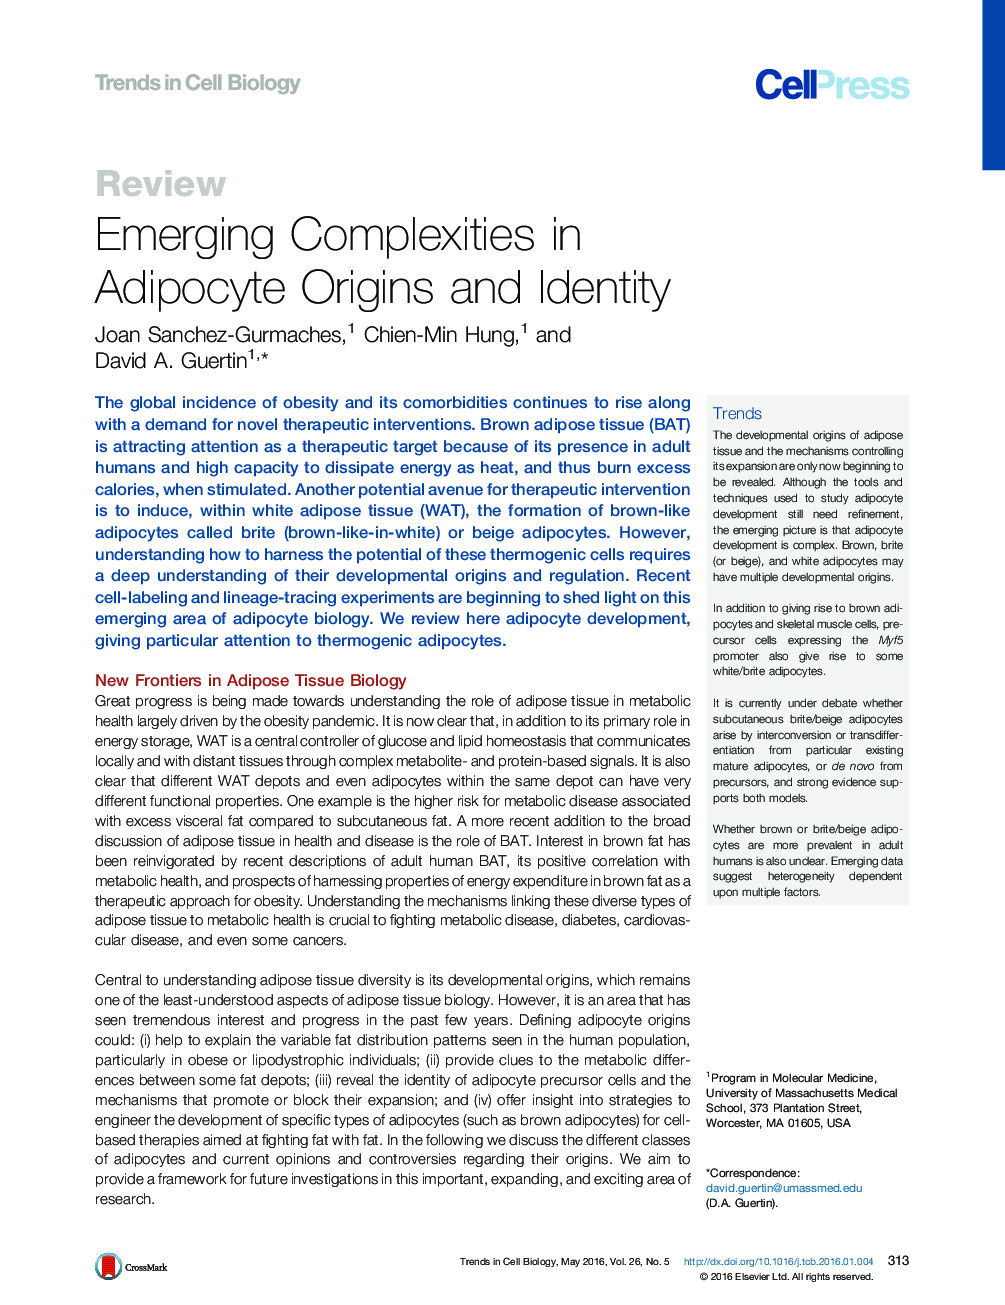 Emerging Complexities in Adipocyte Origins and Identity